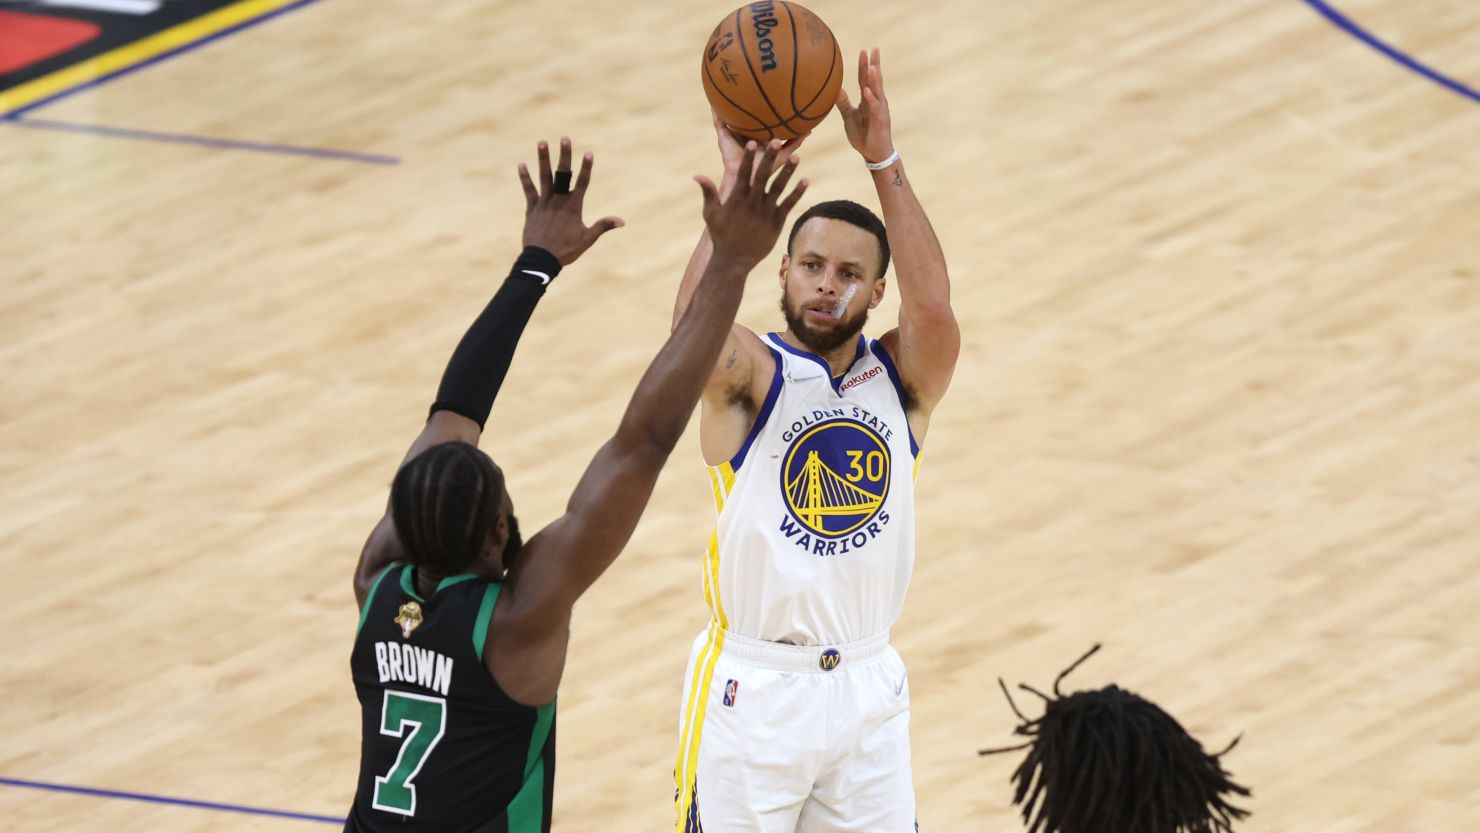 Steph Curry shoots a three pointer against Jaylen Brown of the Boston Celtics during the third quarter of Game 5 of the 2022 NBA Finals.